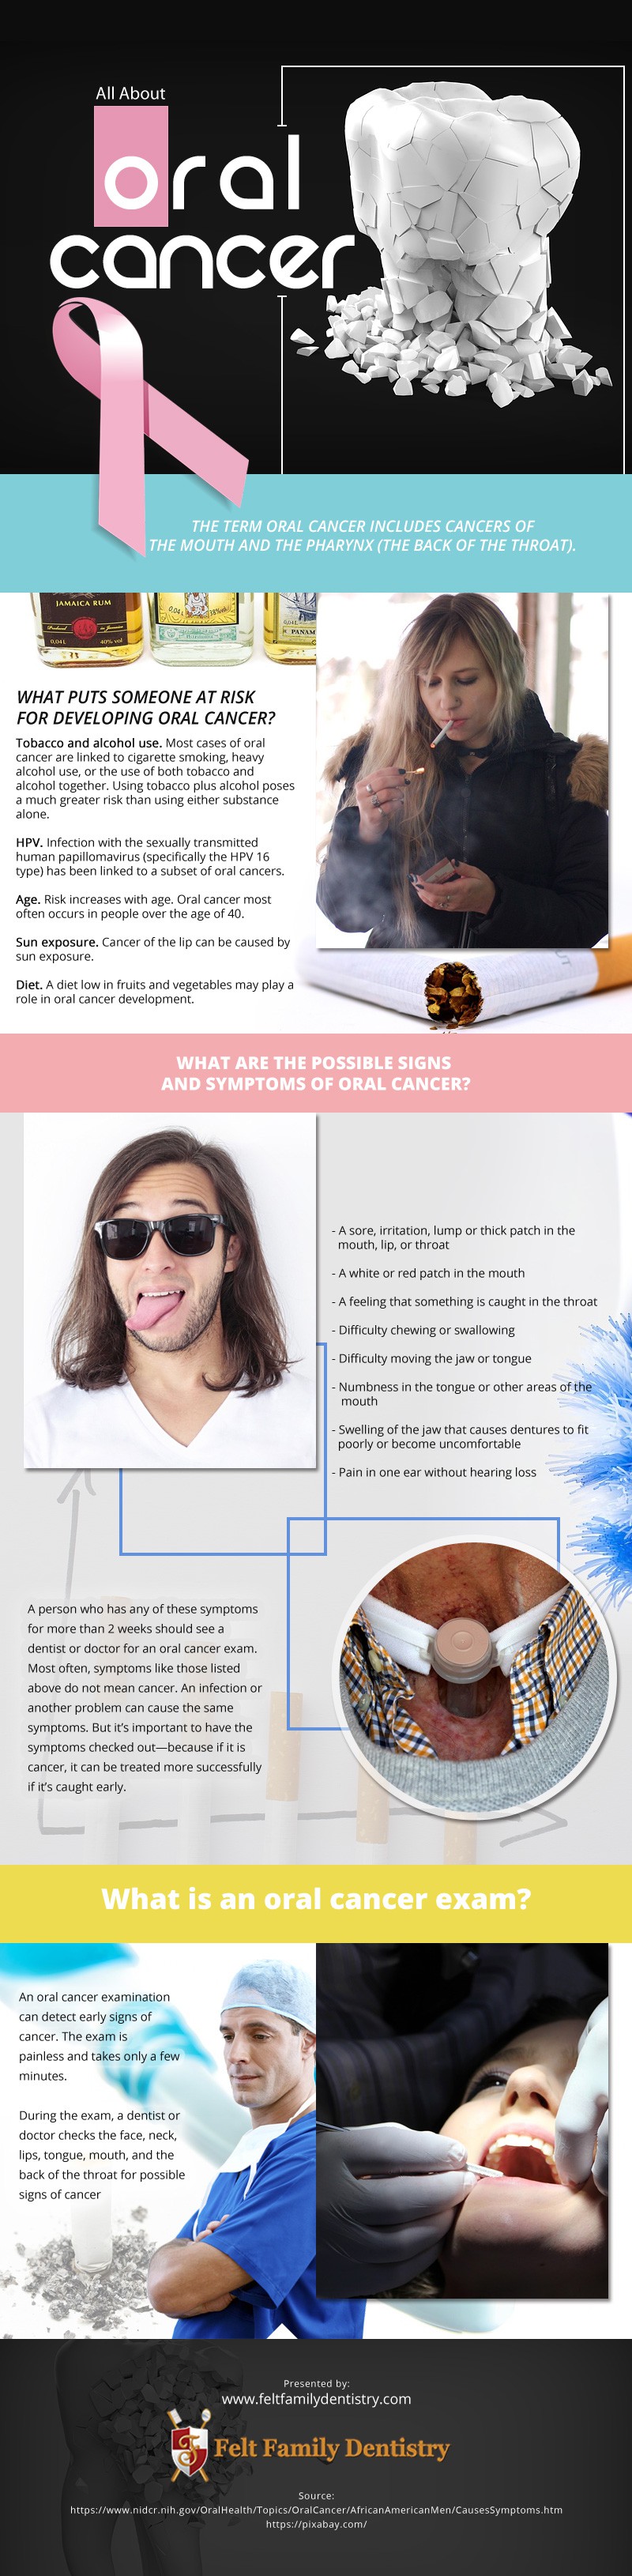 All About Oral Cancer [infographic]